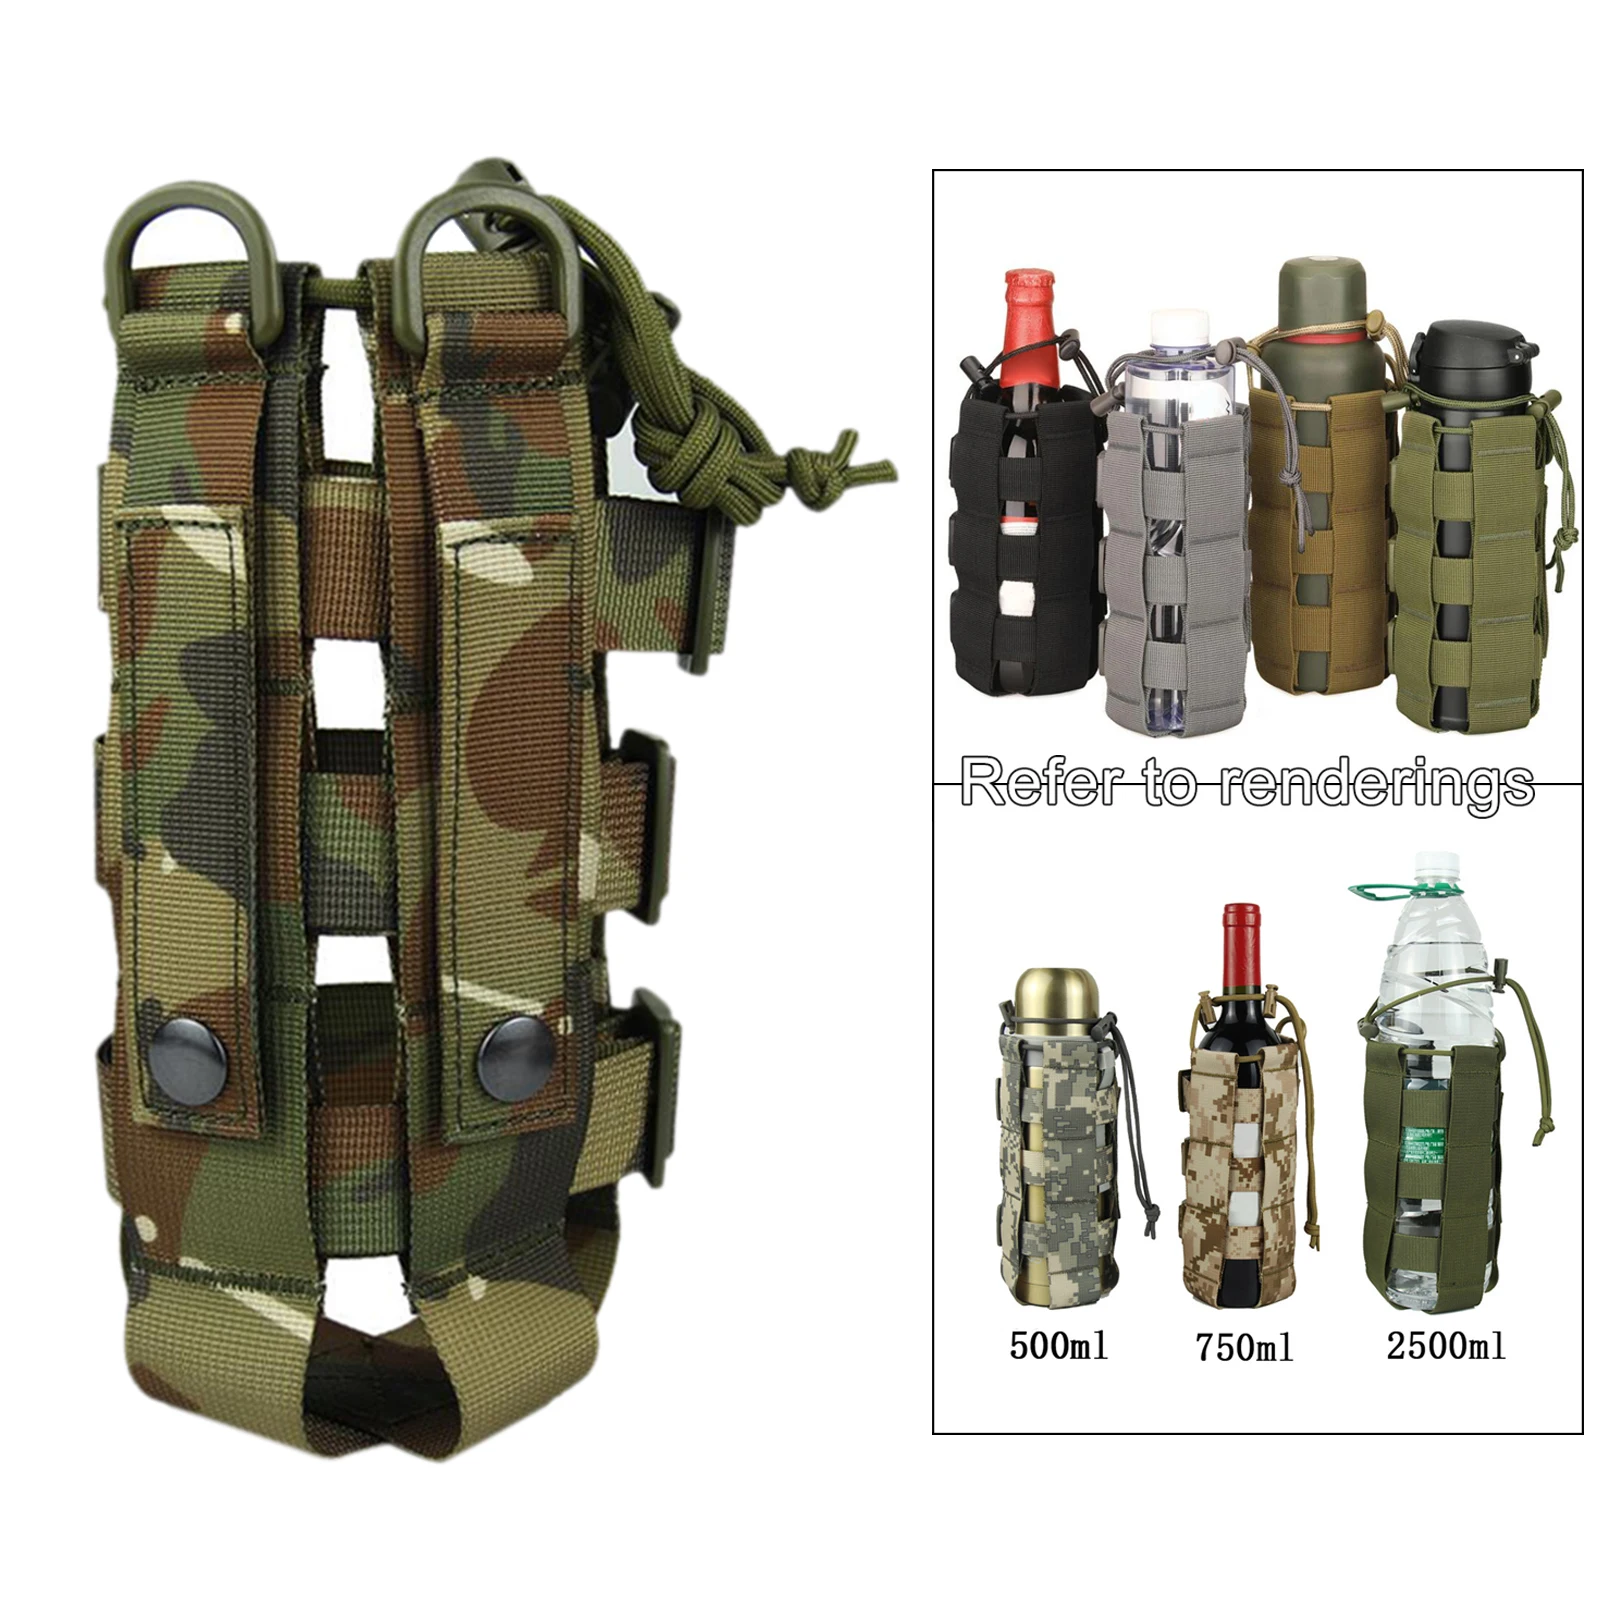 0.3L - 0.8L Tactical Molle Water Bottle Pouch Bag Military Outdoor Travel Hiking Drawstring Water Bottle Holder Kettle Carrier